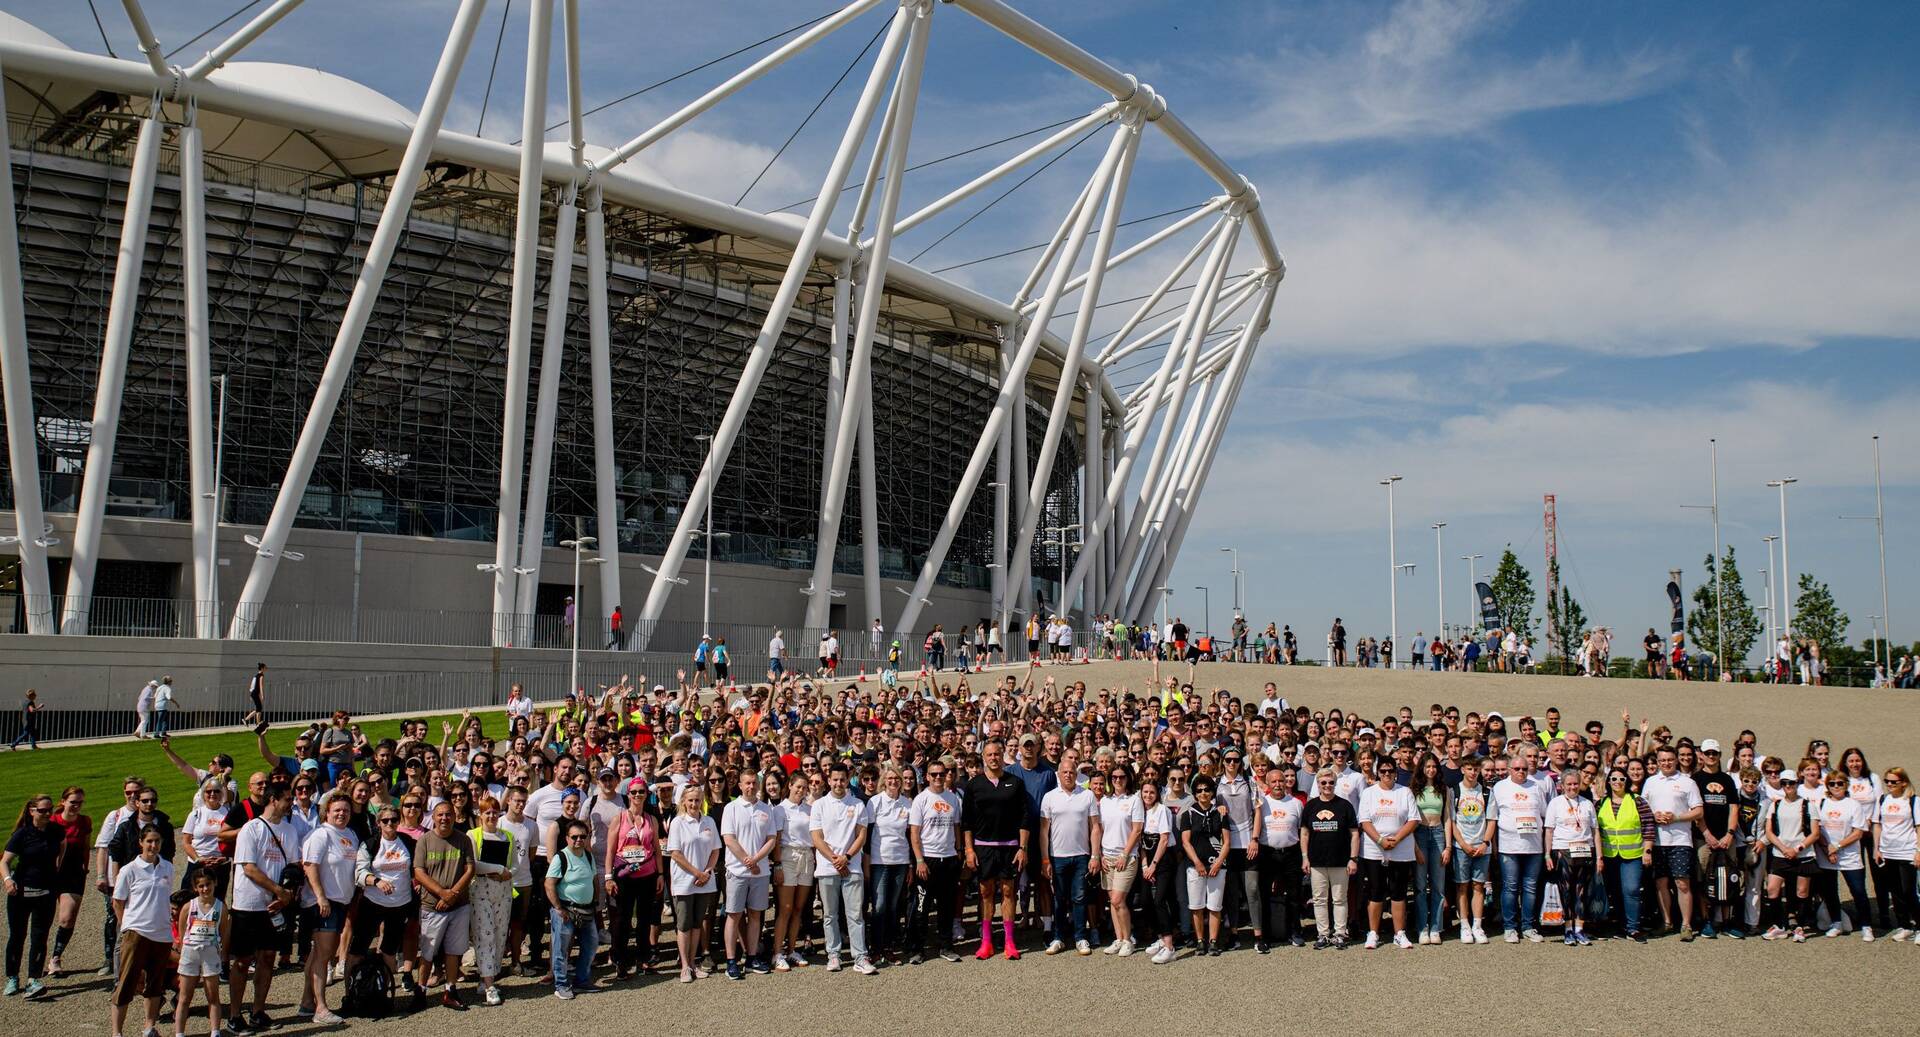 More than 1,200 volunteers participate in a site tour at the National Athletics Centre